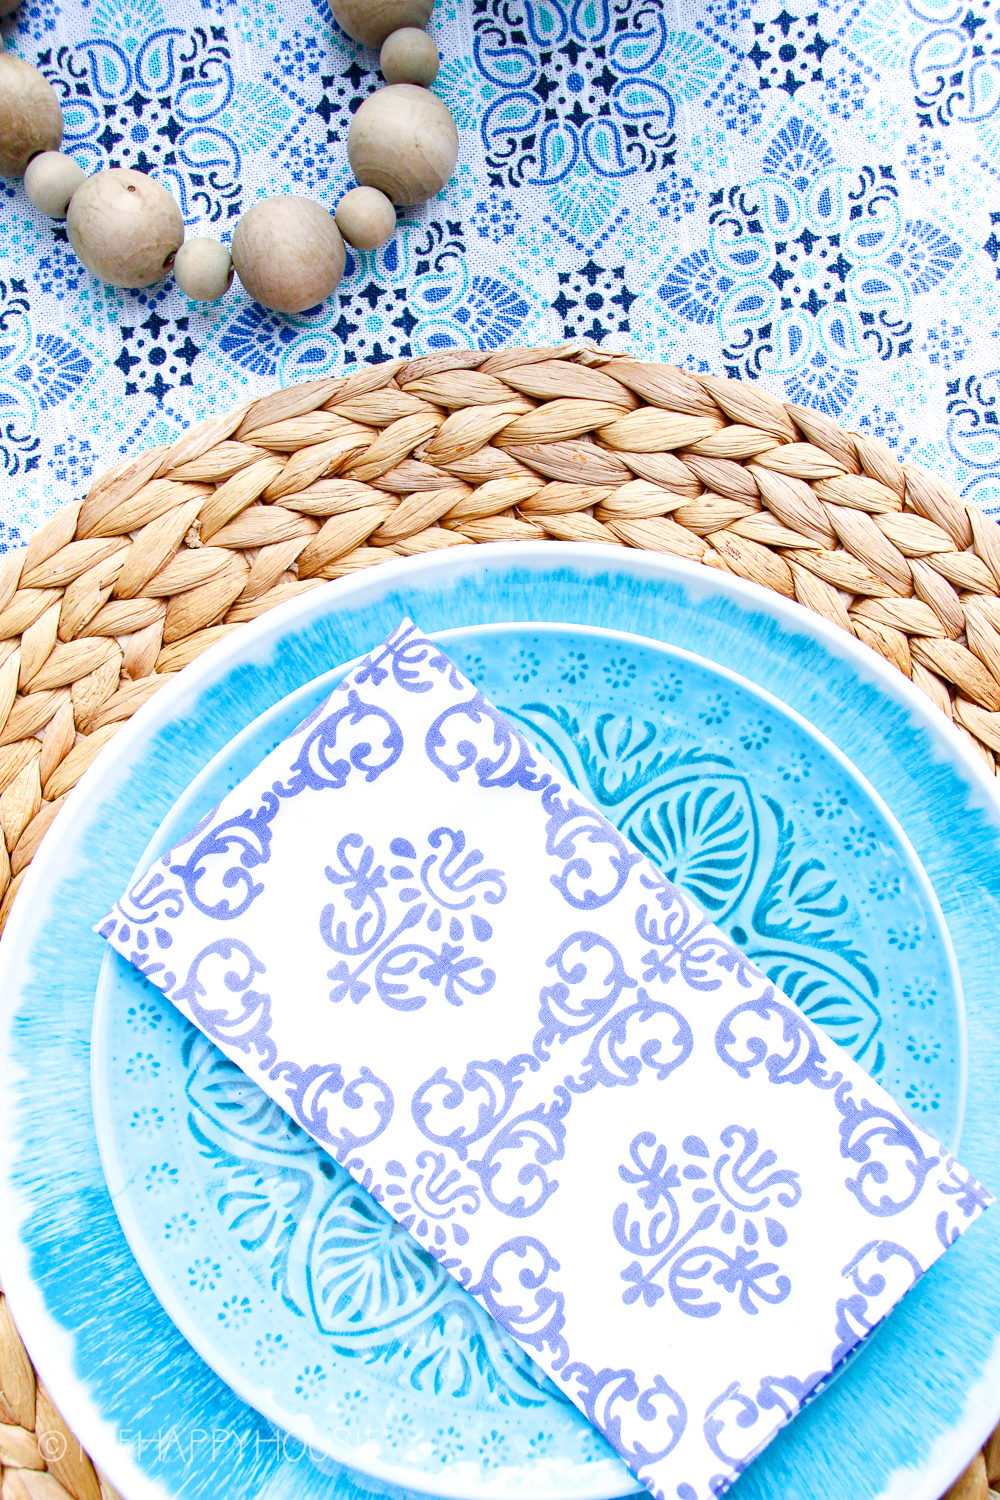 Blue and white plates with a blue and white napkin.